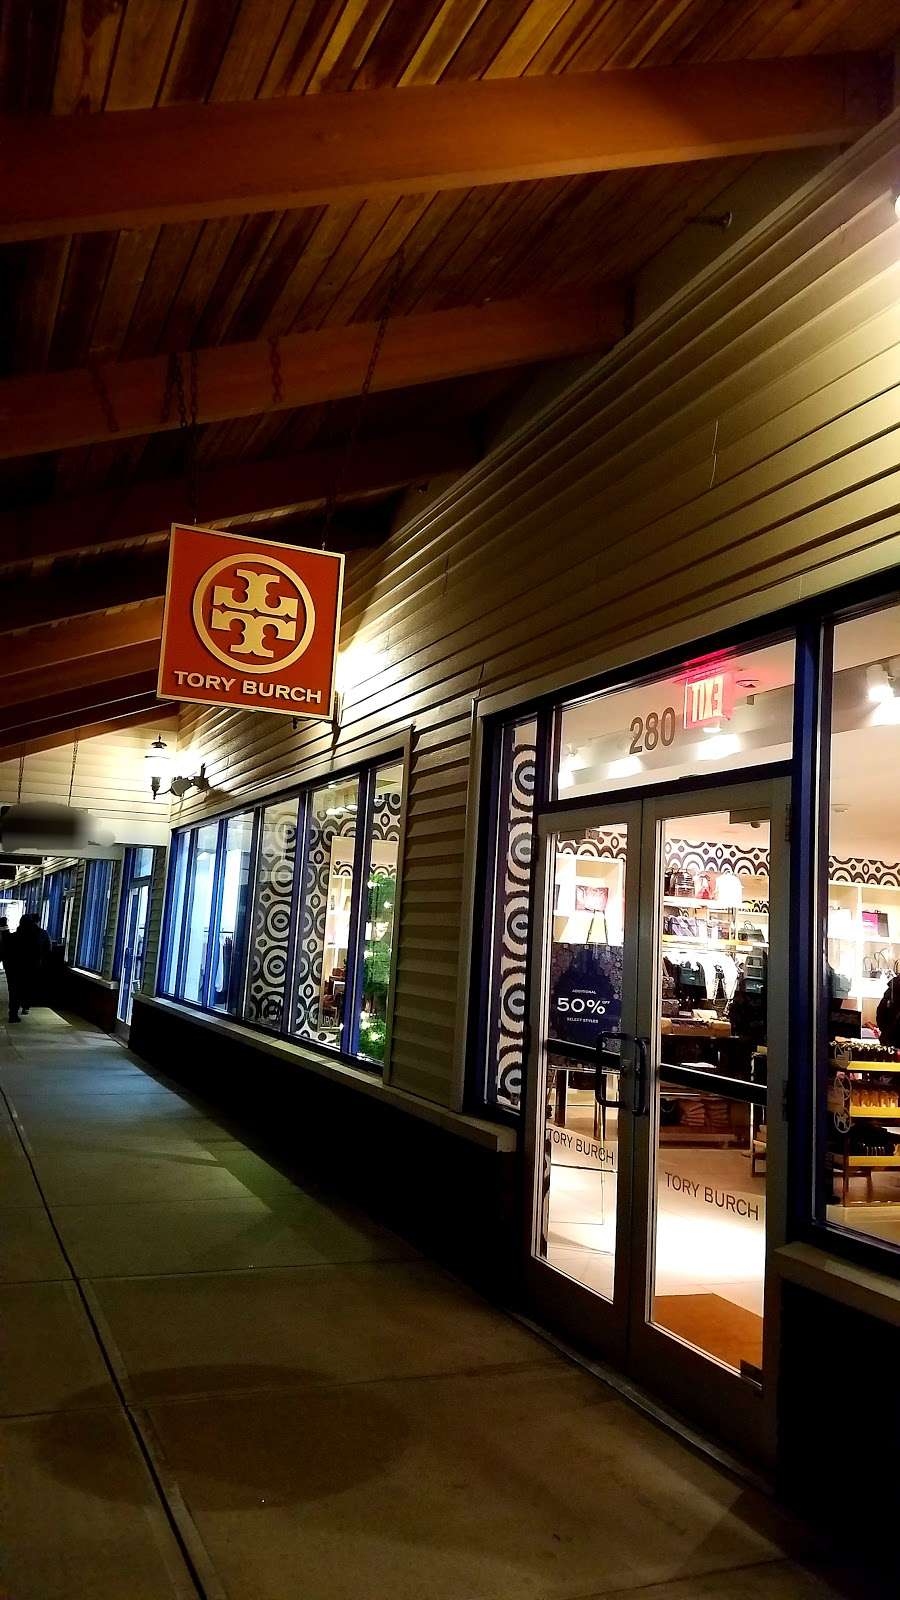 Tory Burch Outlet - 1 Premium, Outlet Blvd #280, Wrentham, MA 02093